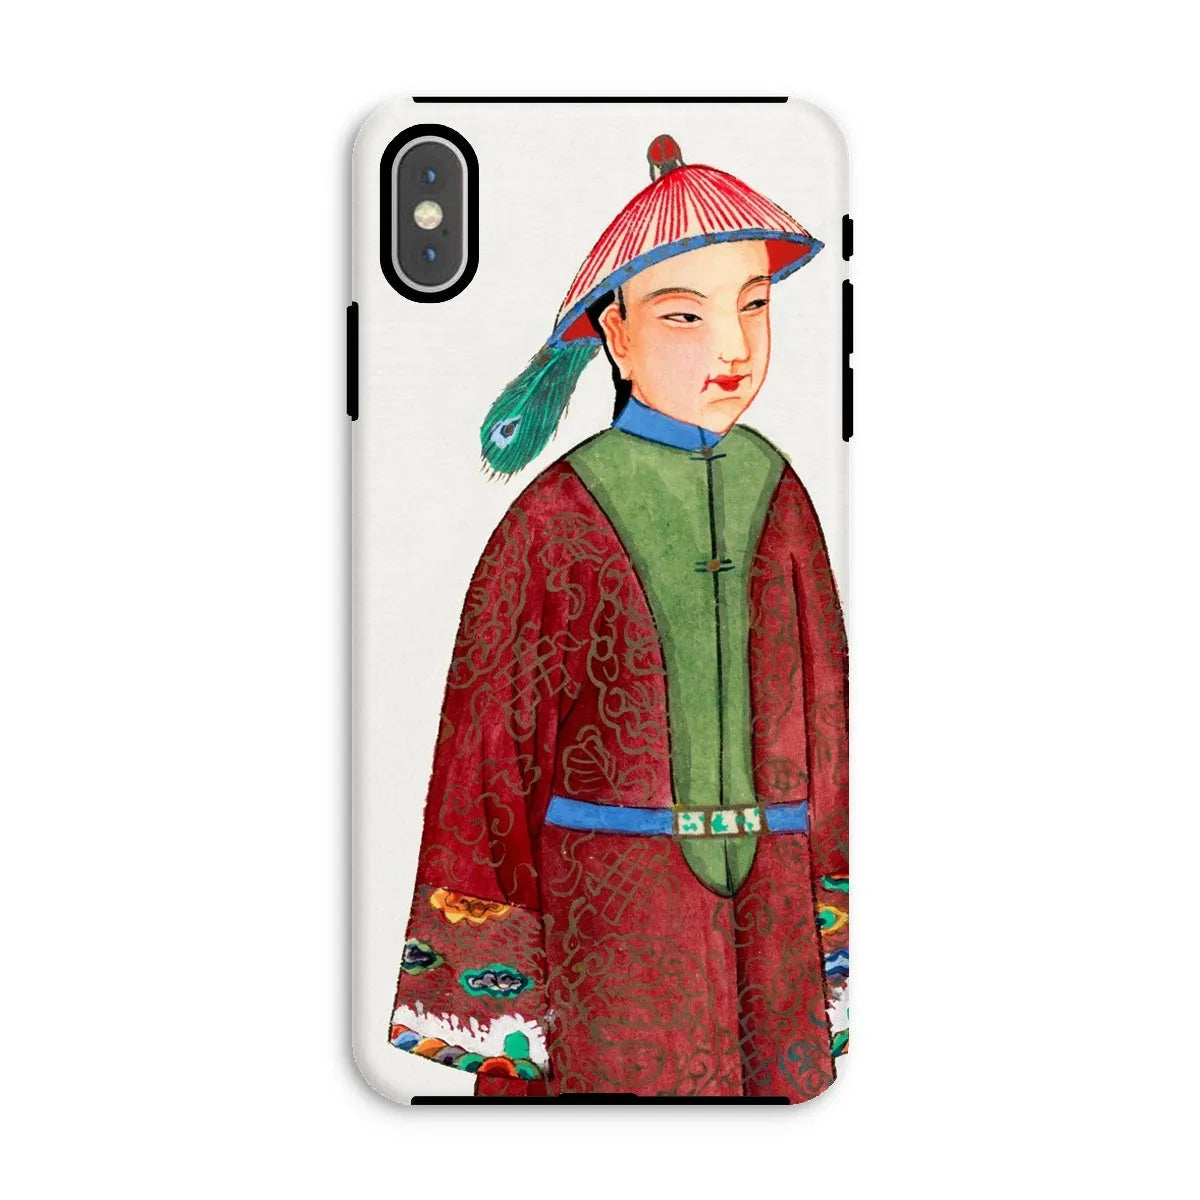 Manchu Dandy - Chinese Aesthetic Art Phone Case - Iphone Xs Max / Matte - Mobile Phone Cases - Aesthetic Art